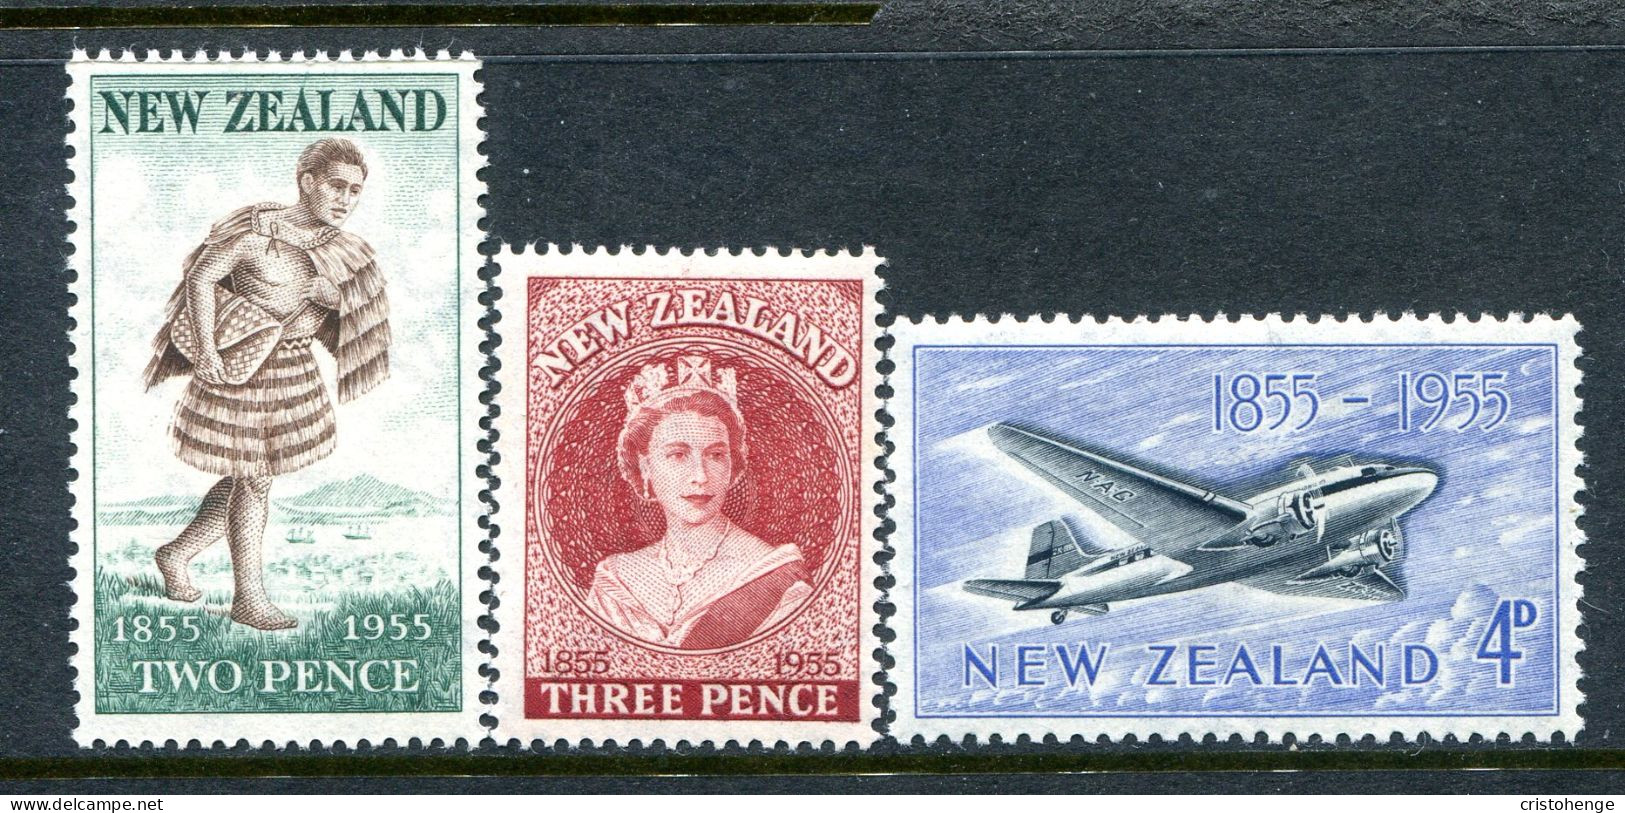 New Zealand 1955 Centenary Of First New Zealand Postage Stamps Set HM (SG 739-741) - Unused Stamps